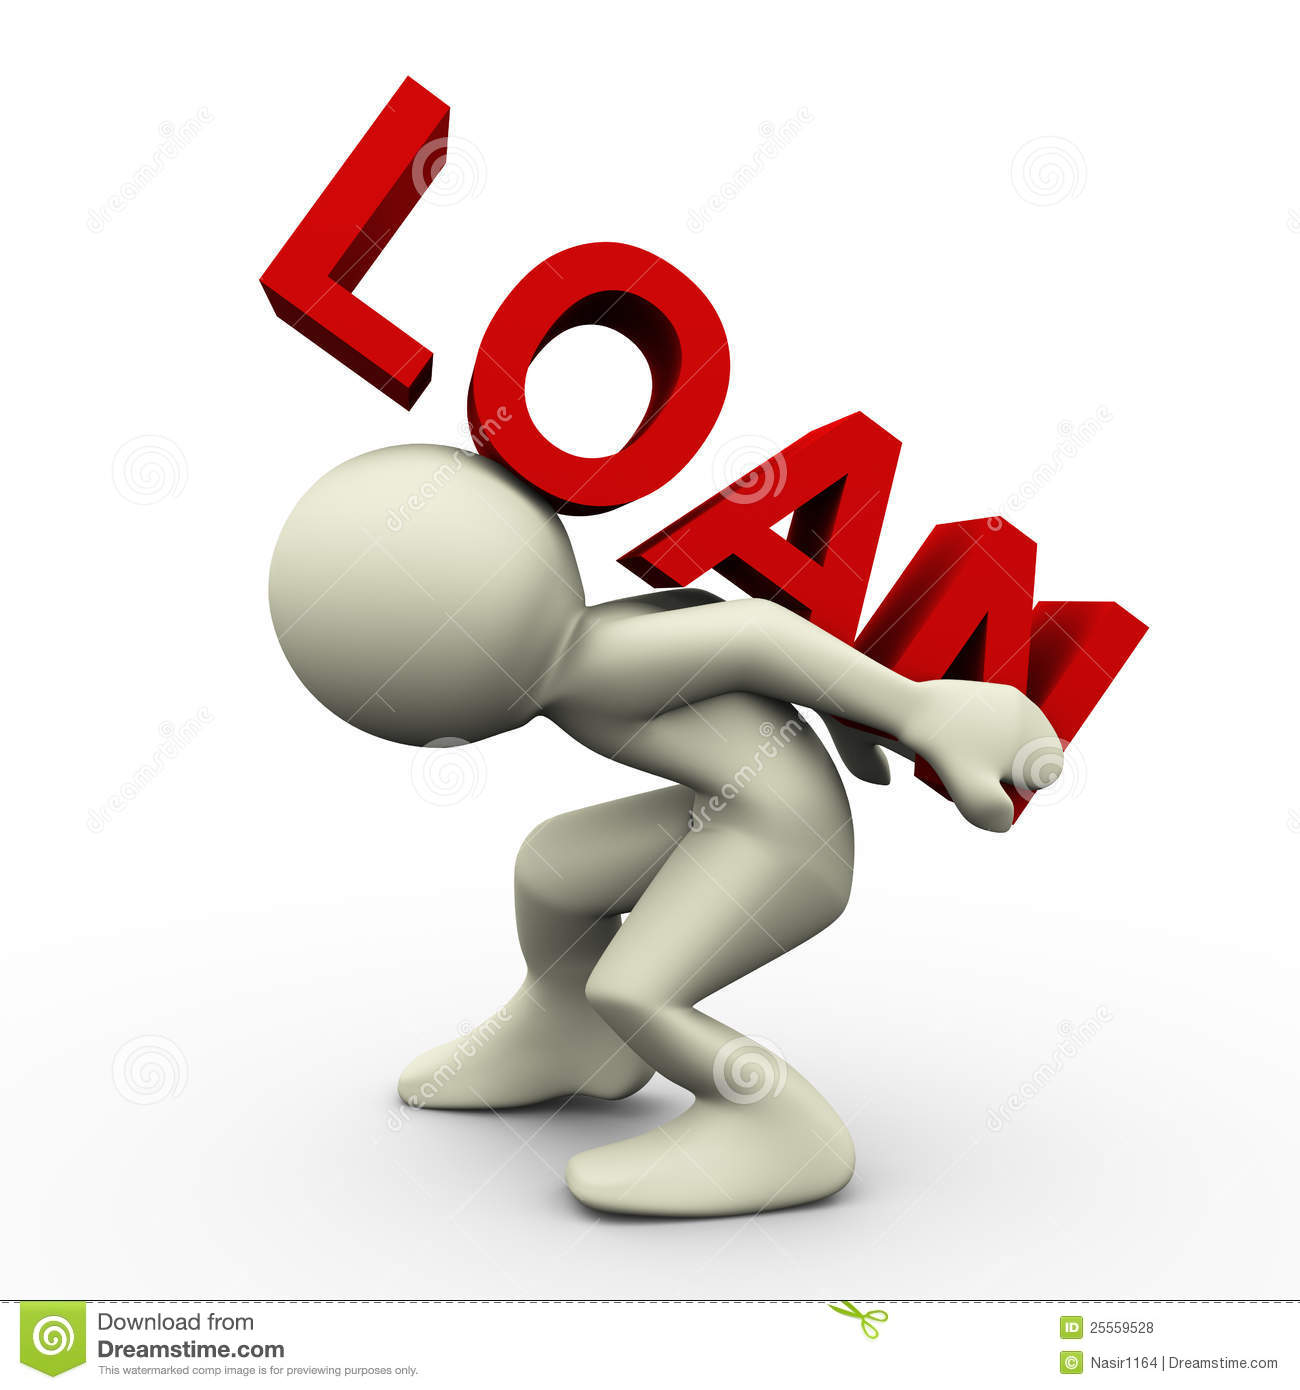 3d Render Of Man Carrying Loan Text  3d Illustration Of Human People